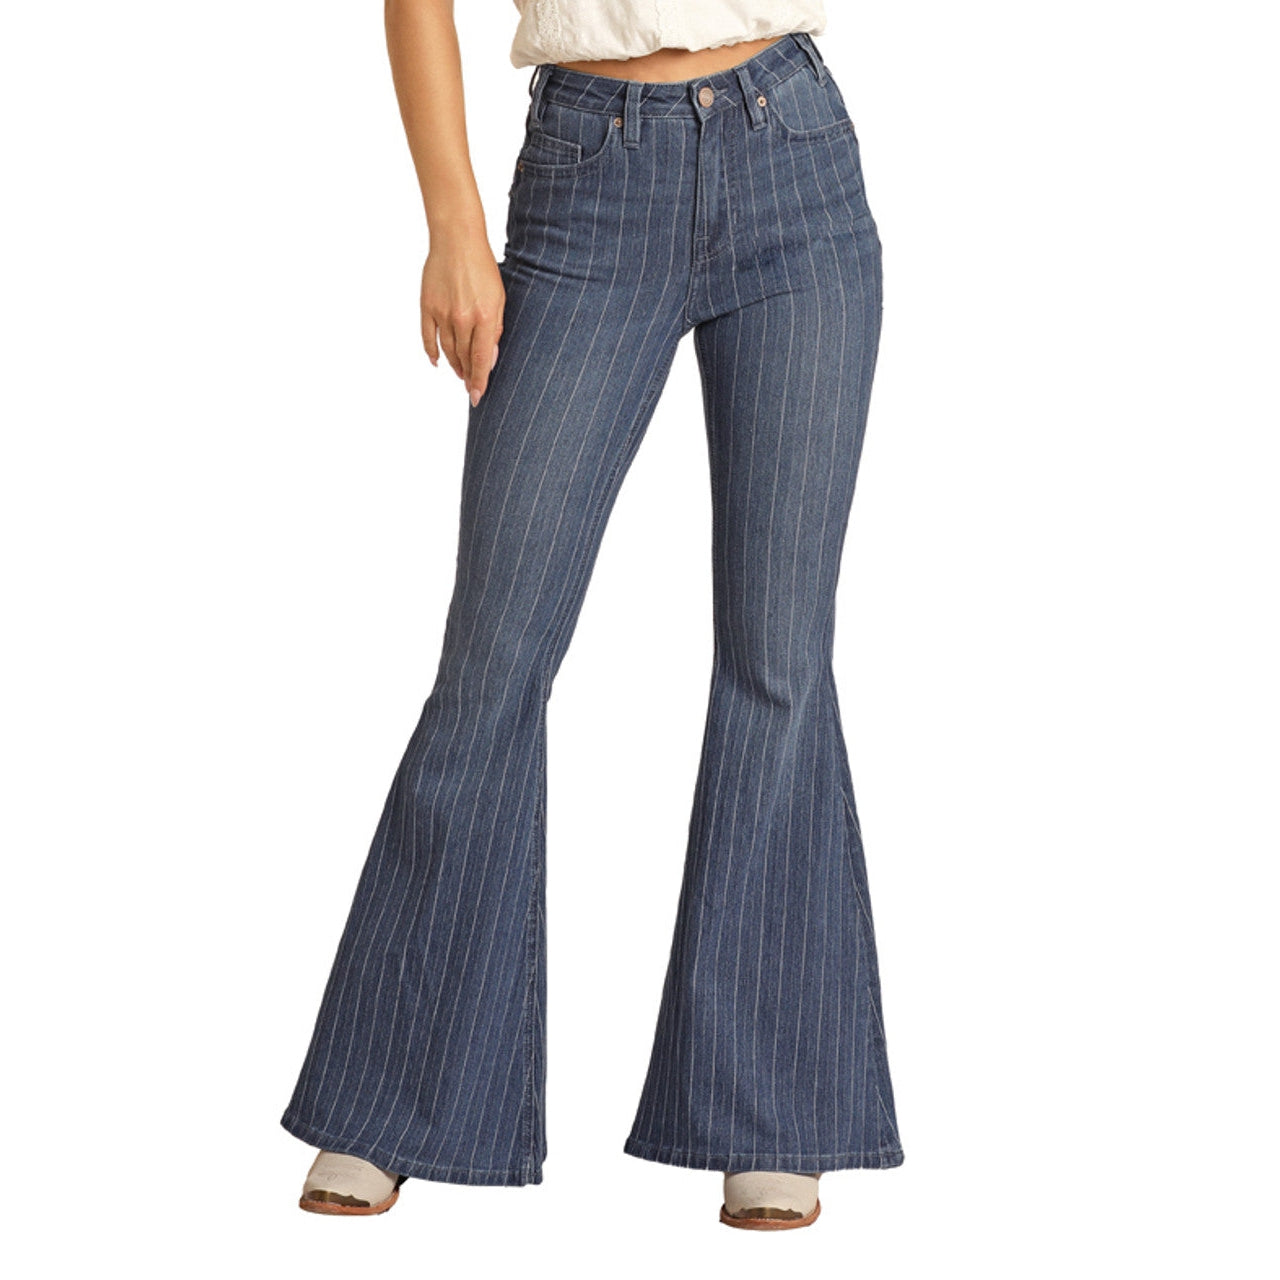 Rock & Roll Women's High Rise Extra Stretch Striped Bell Bottom Jeans - Medium Wash